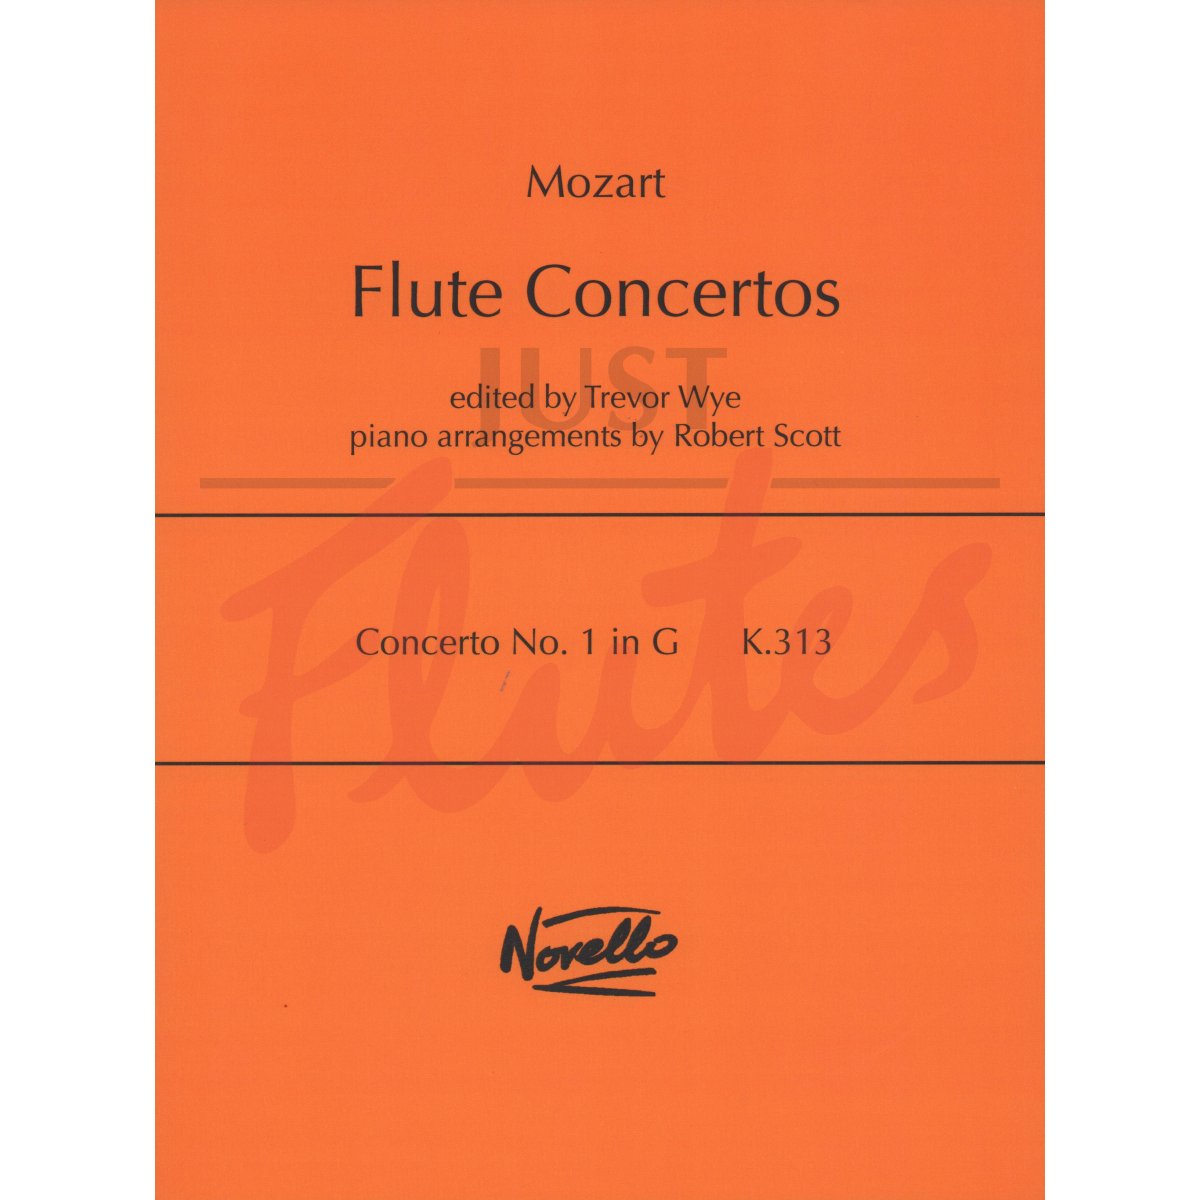 Concerto No 1 in G major for Flute and Piano